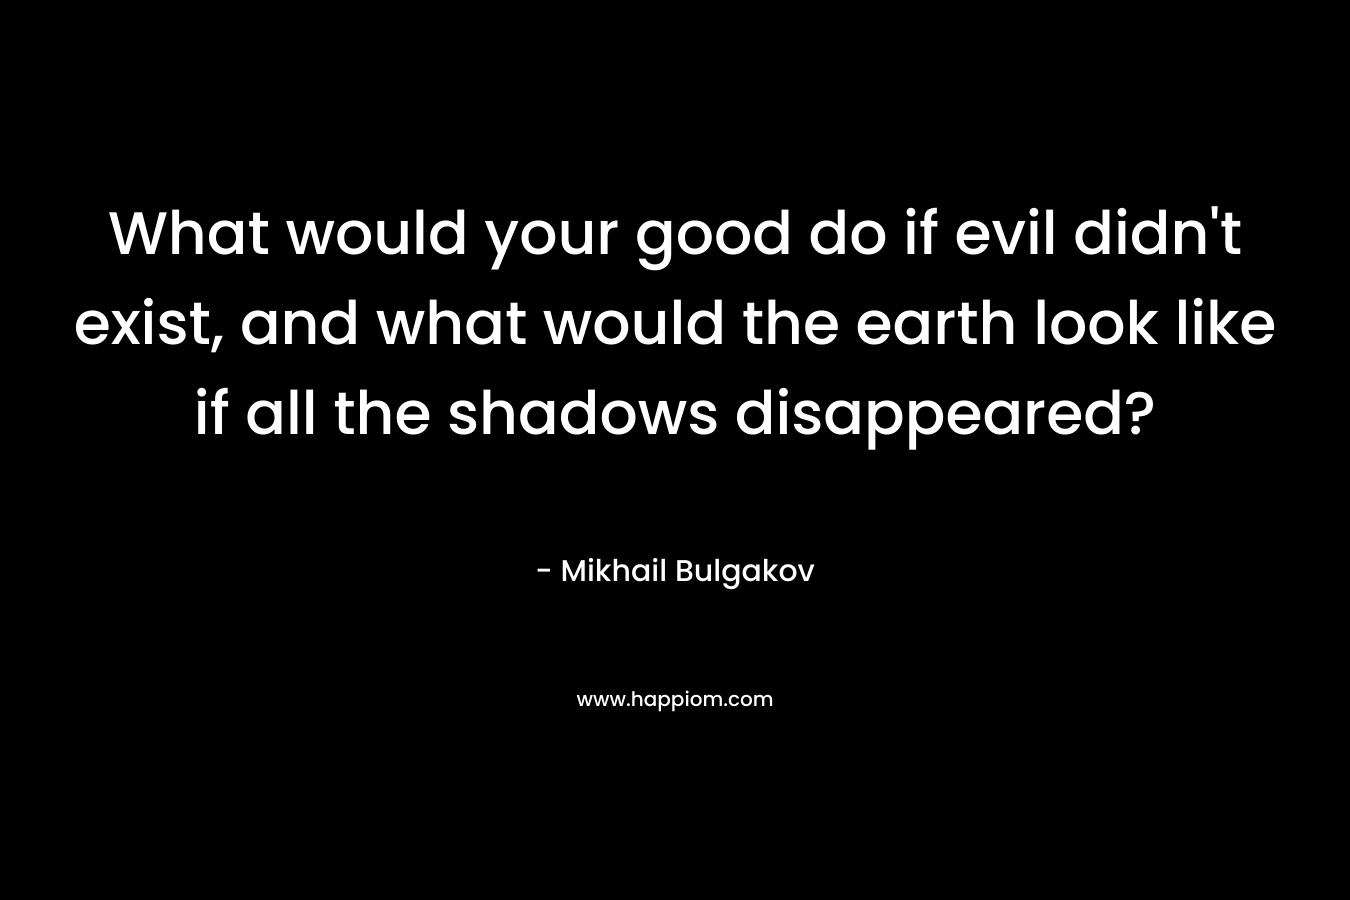 What would your good do if evil didn't exist, and what would the earth look like if all the shadows disappeared?